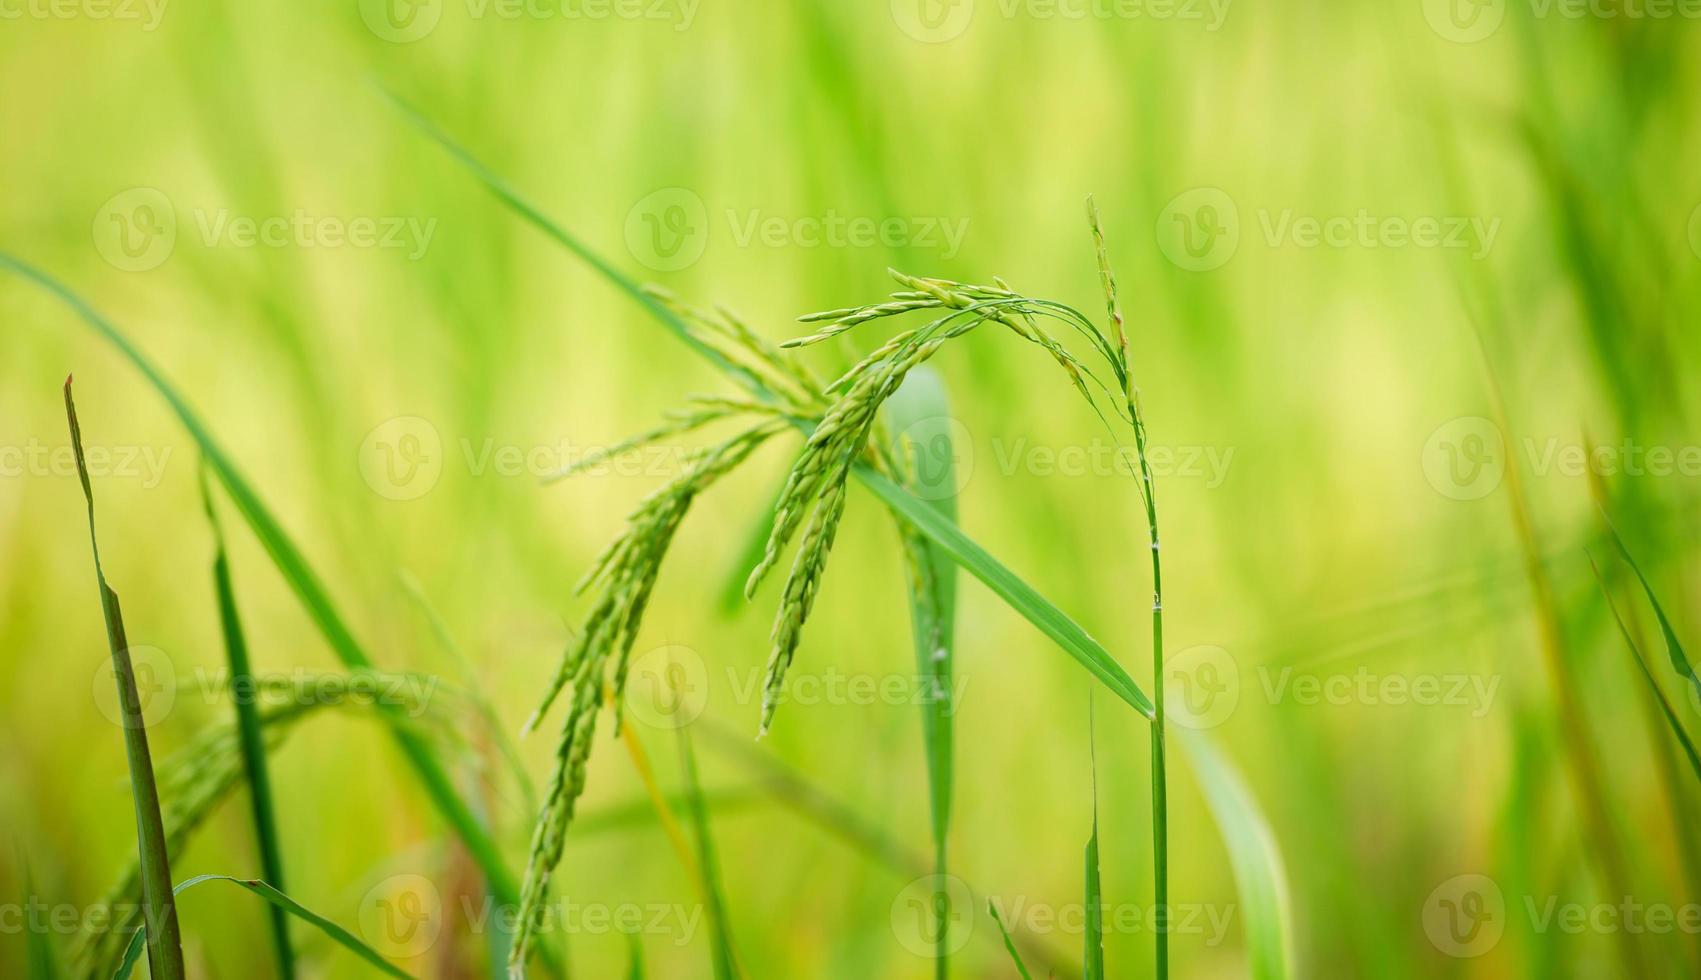 Rice plant, the head of rice that is producing food and flour. Green rice plants in the fields of farmers who grow rice for food and distribute. photo